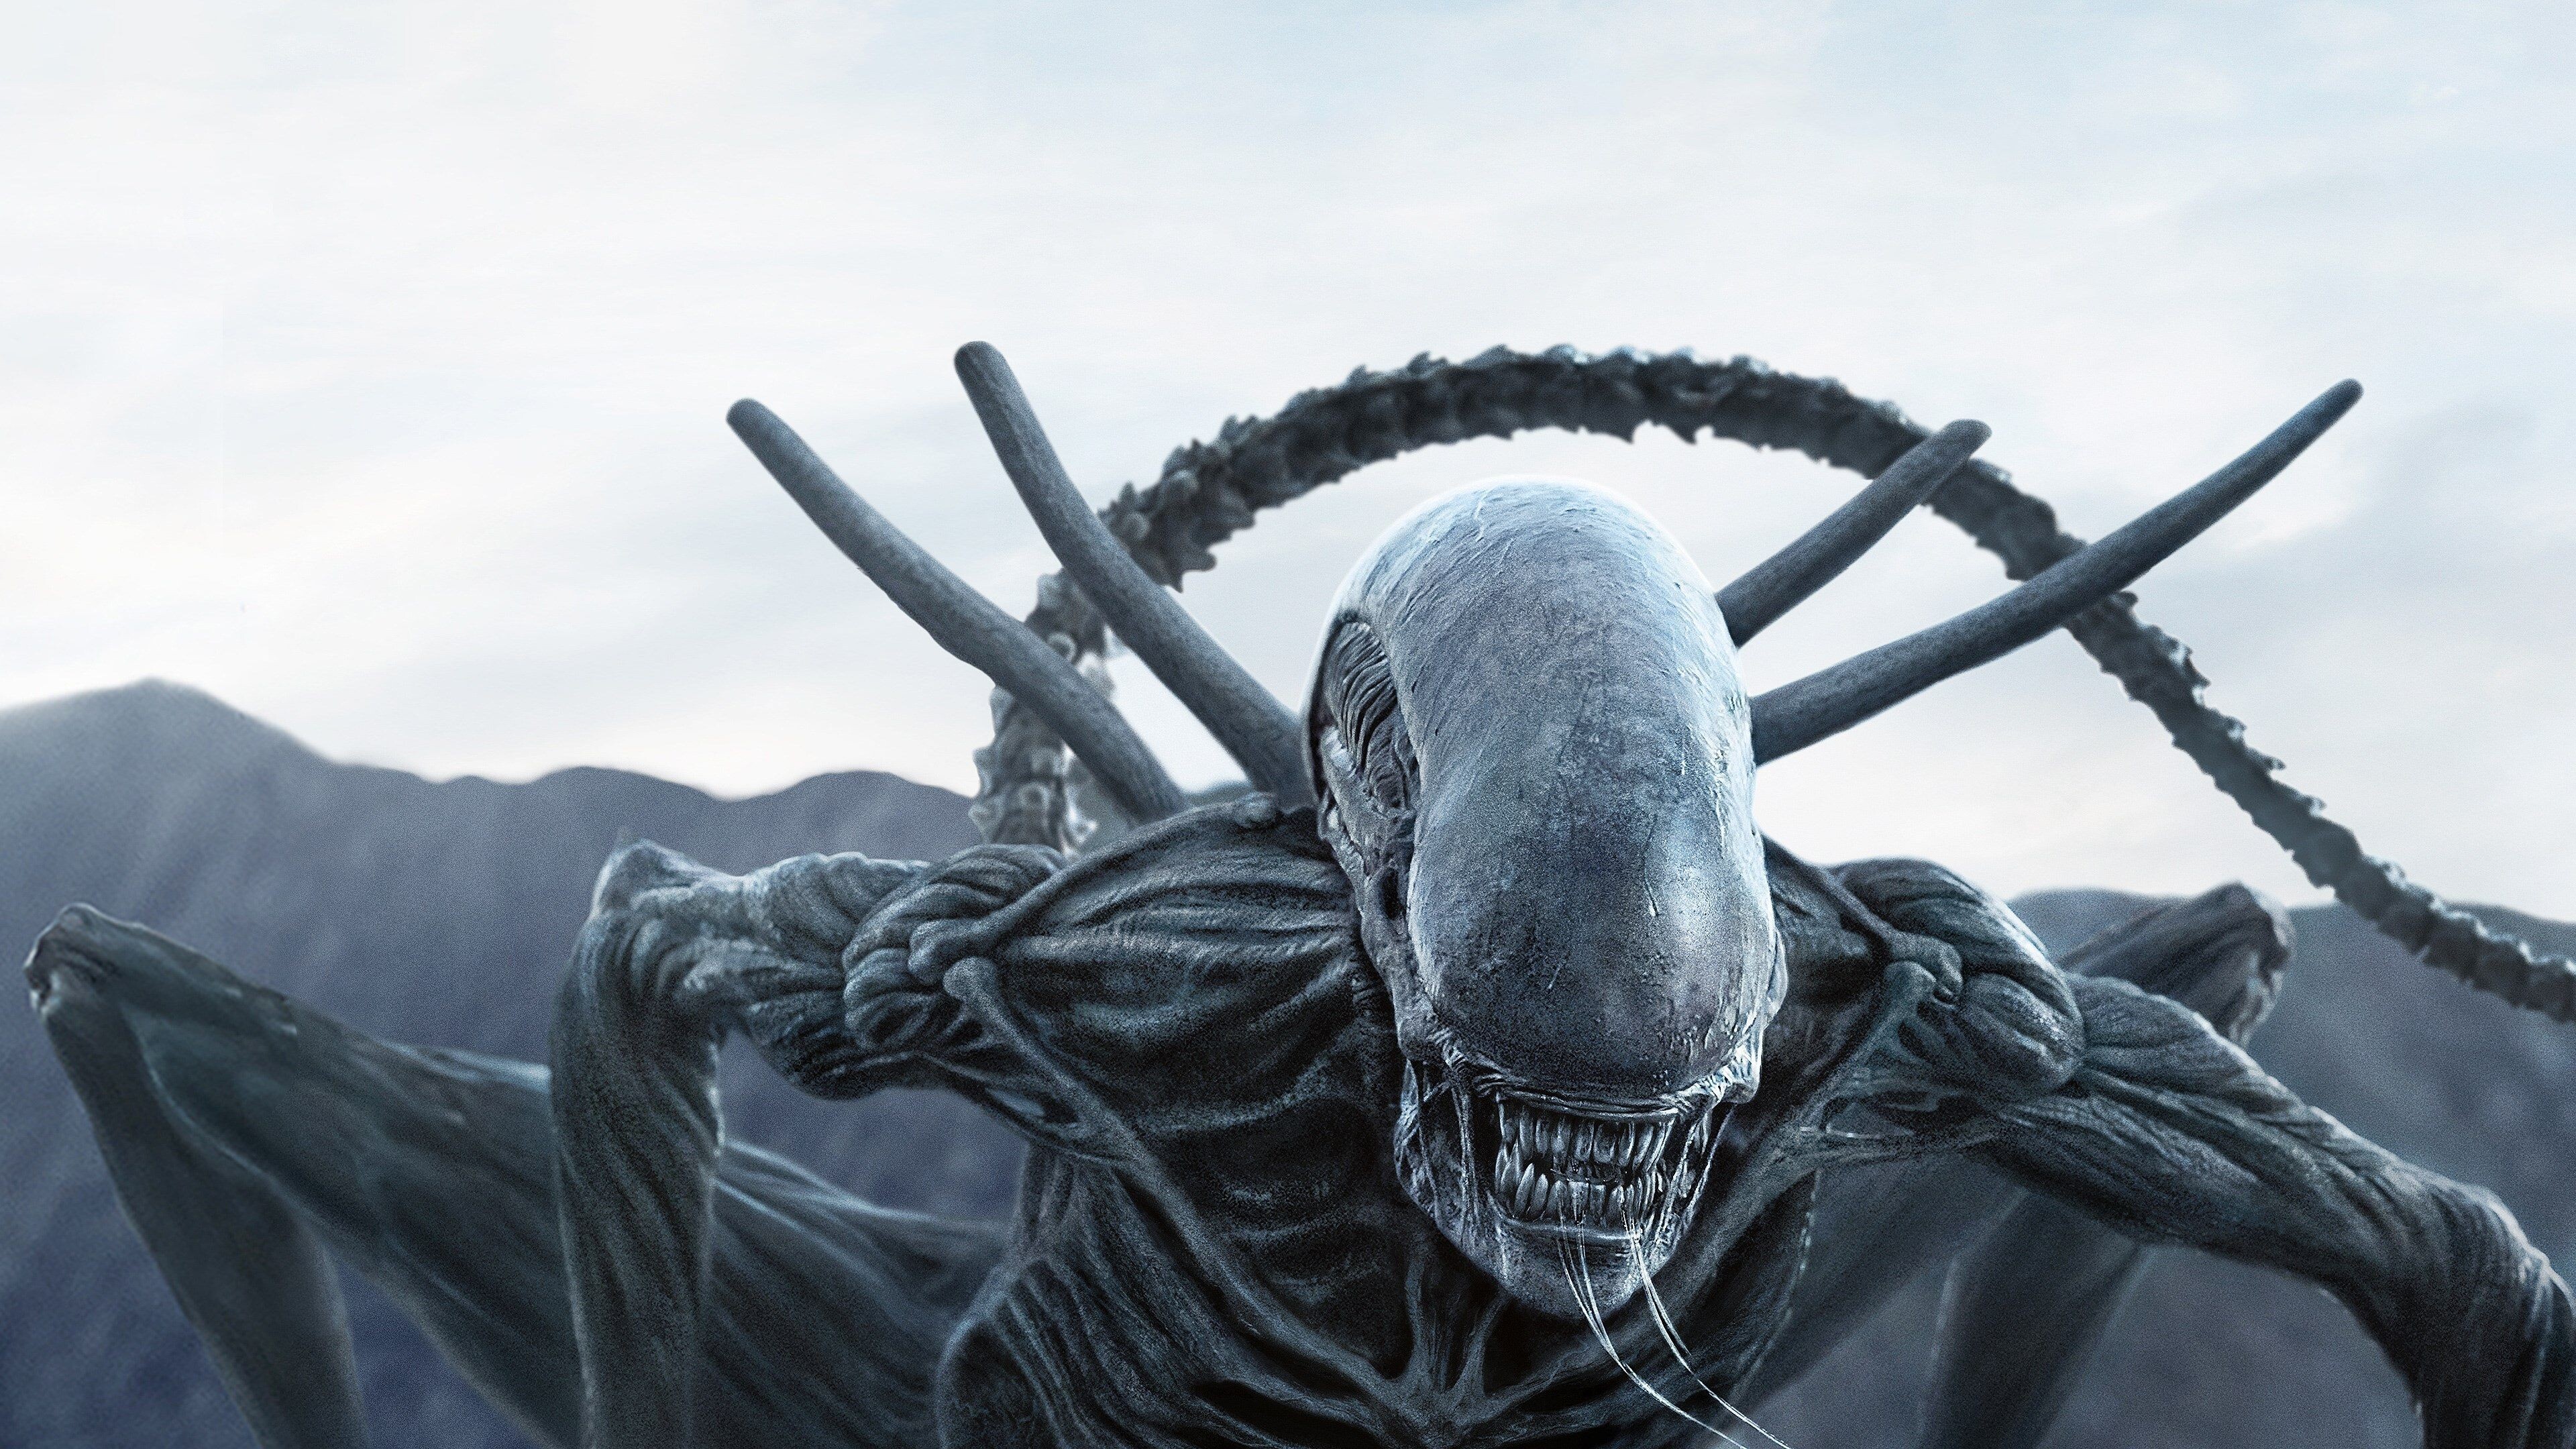 H.R. Giger: Alien: Covenant, Neomorph, Science Fiction Action Horror Film, Directed And Produced By Ridley Scott, 2017. 3840x2160 4K Background.